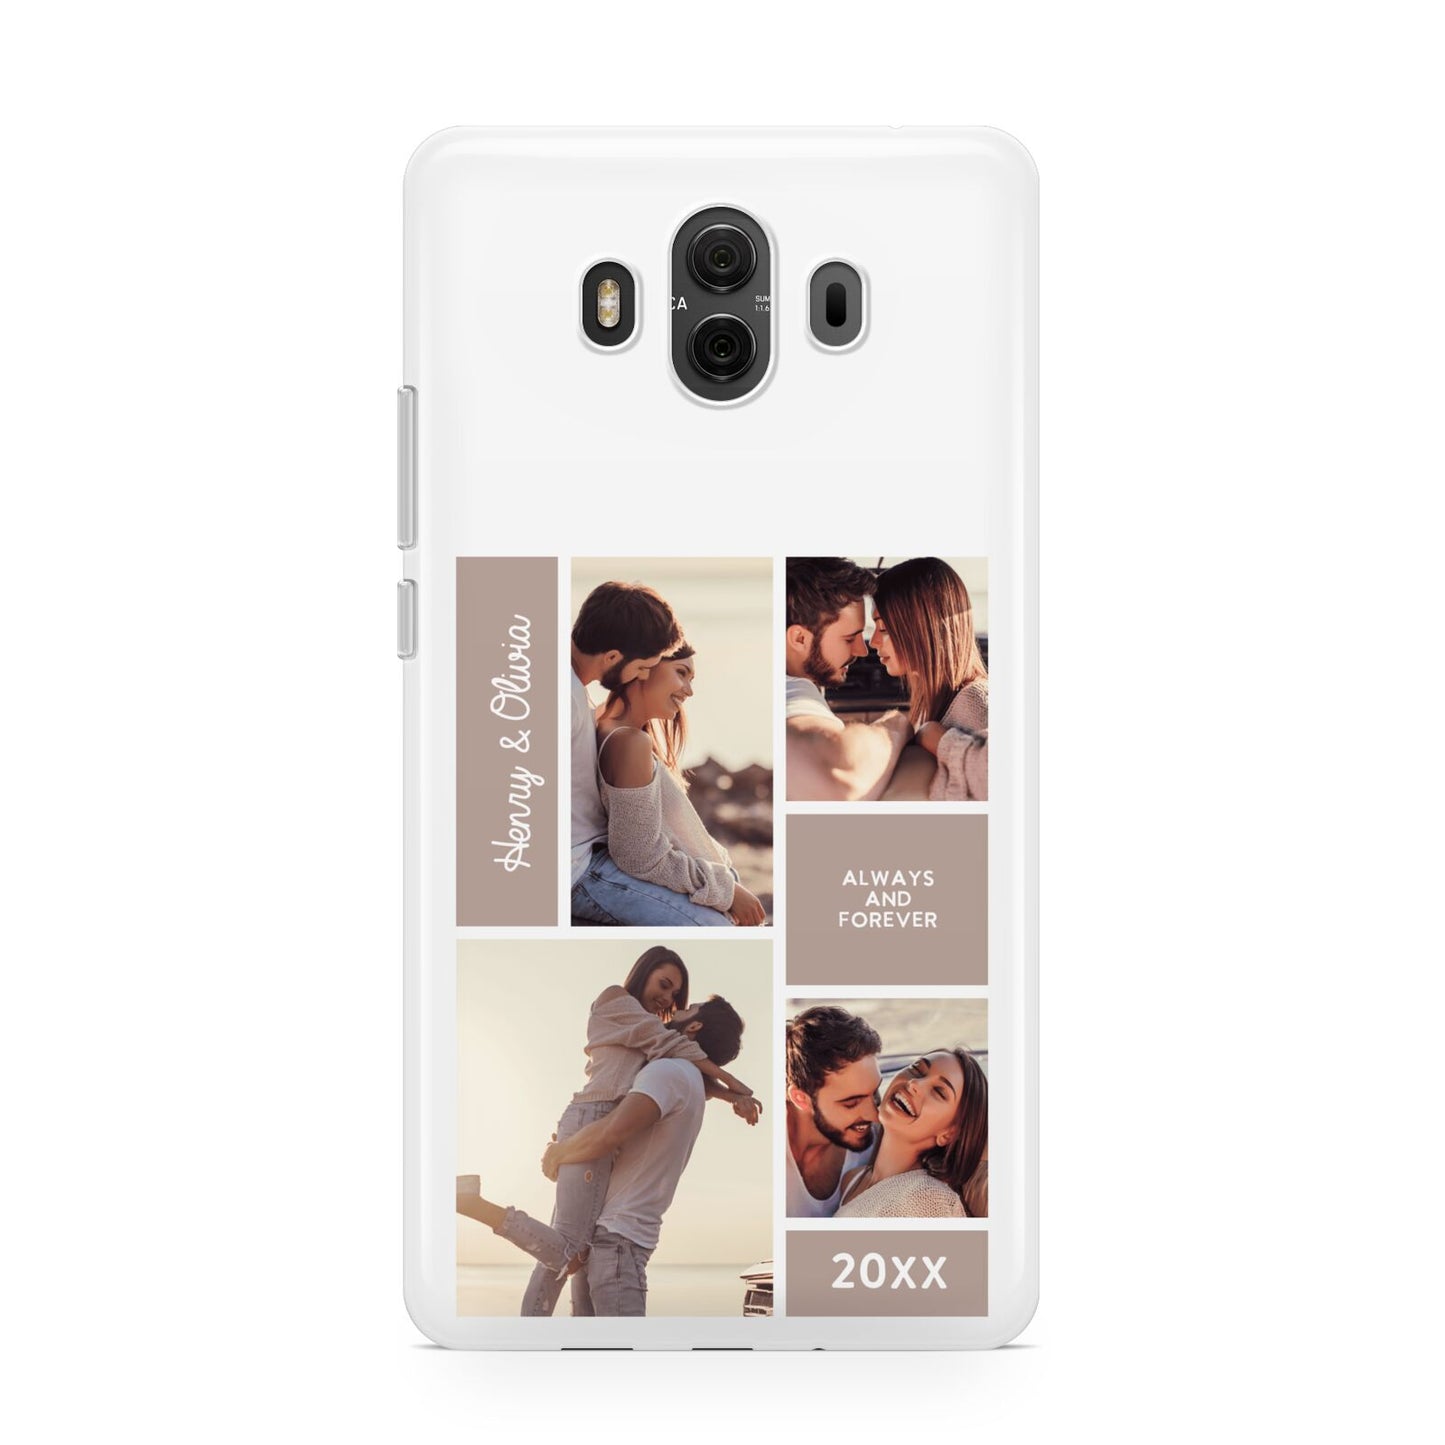 Couples Valentine Photo Collage Personalised Huawei Mate 10 Protective Phone Case